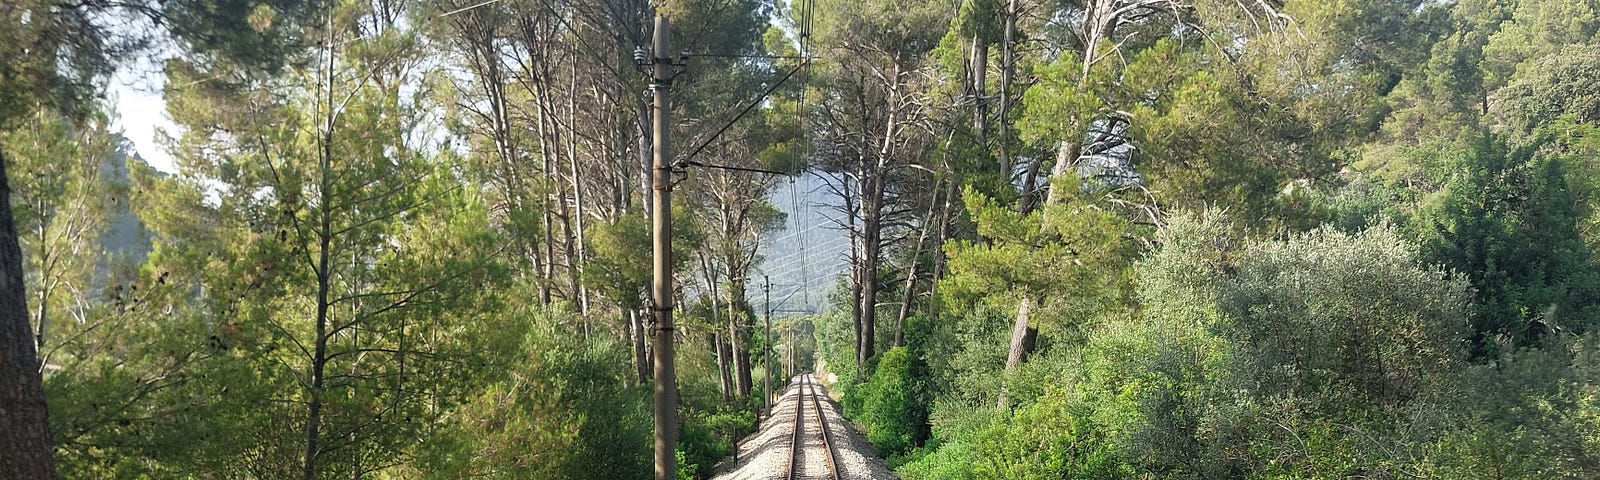 Train tracks leading into a green forest